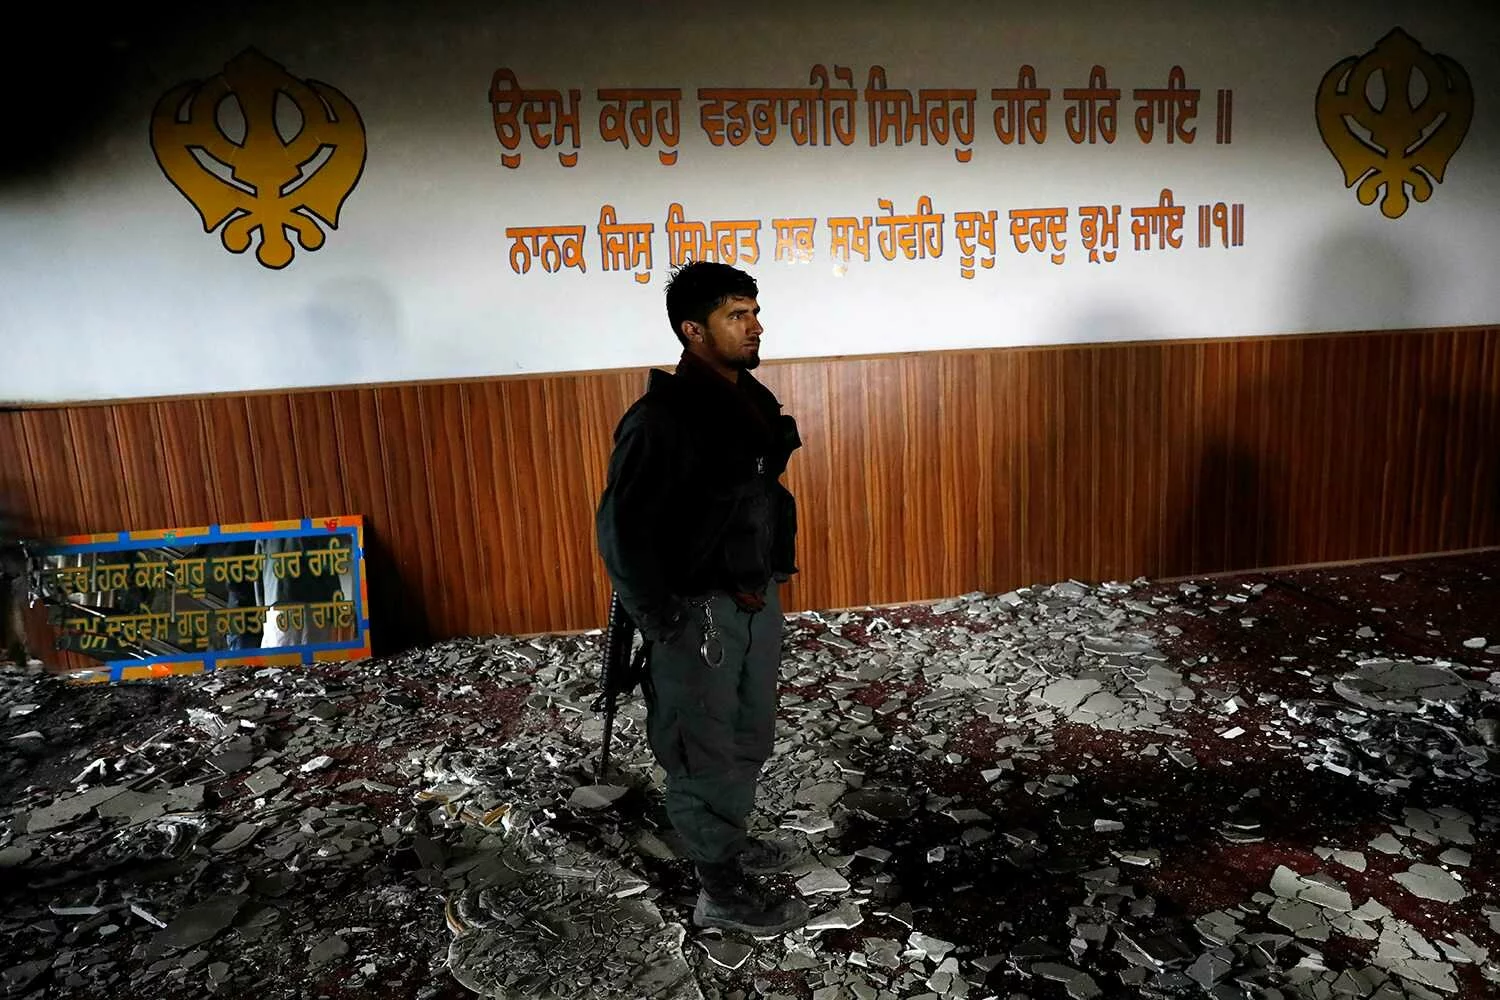 Kabul attack: Overseas Indian fighters haunt India’s interests abroad - Atlantic Council